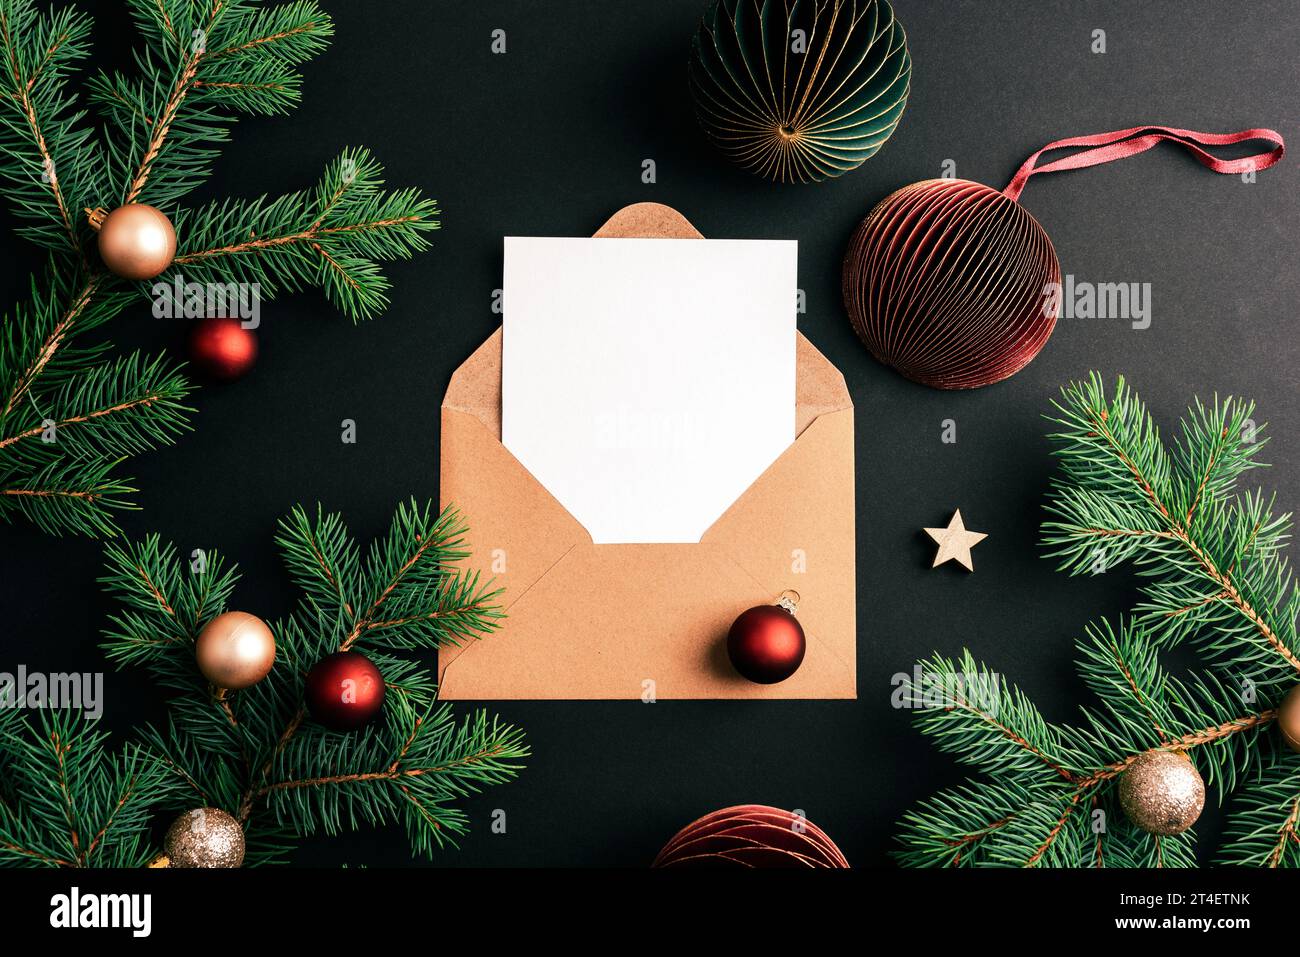 https://c8.alamy.com/comp/2T4ETNK/envelope-with-blank-card-and-fir-branches-with-christmas-balls-on-black-background-christmas-concept-top-view-flat-lay-mockup-2T4ETNK.jpg